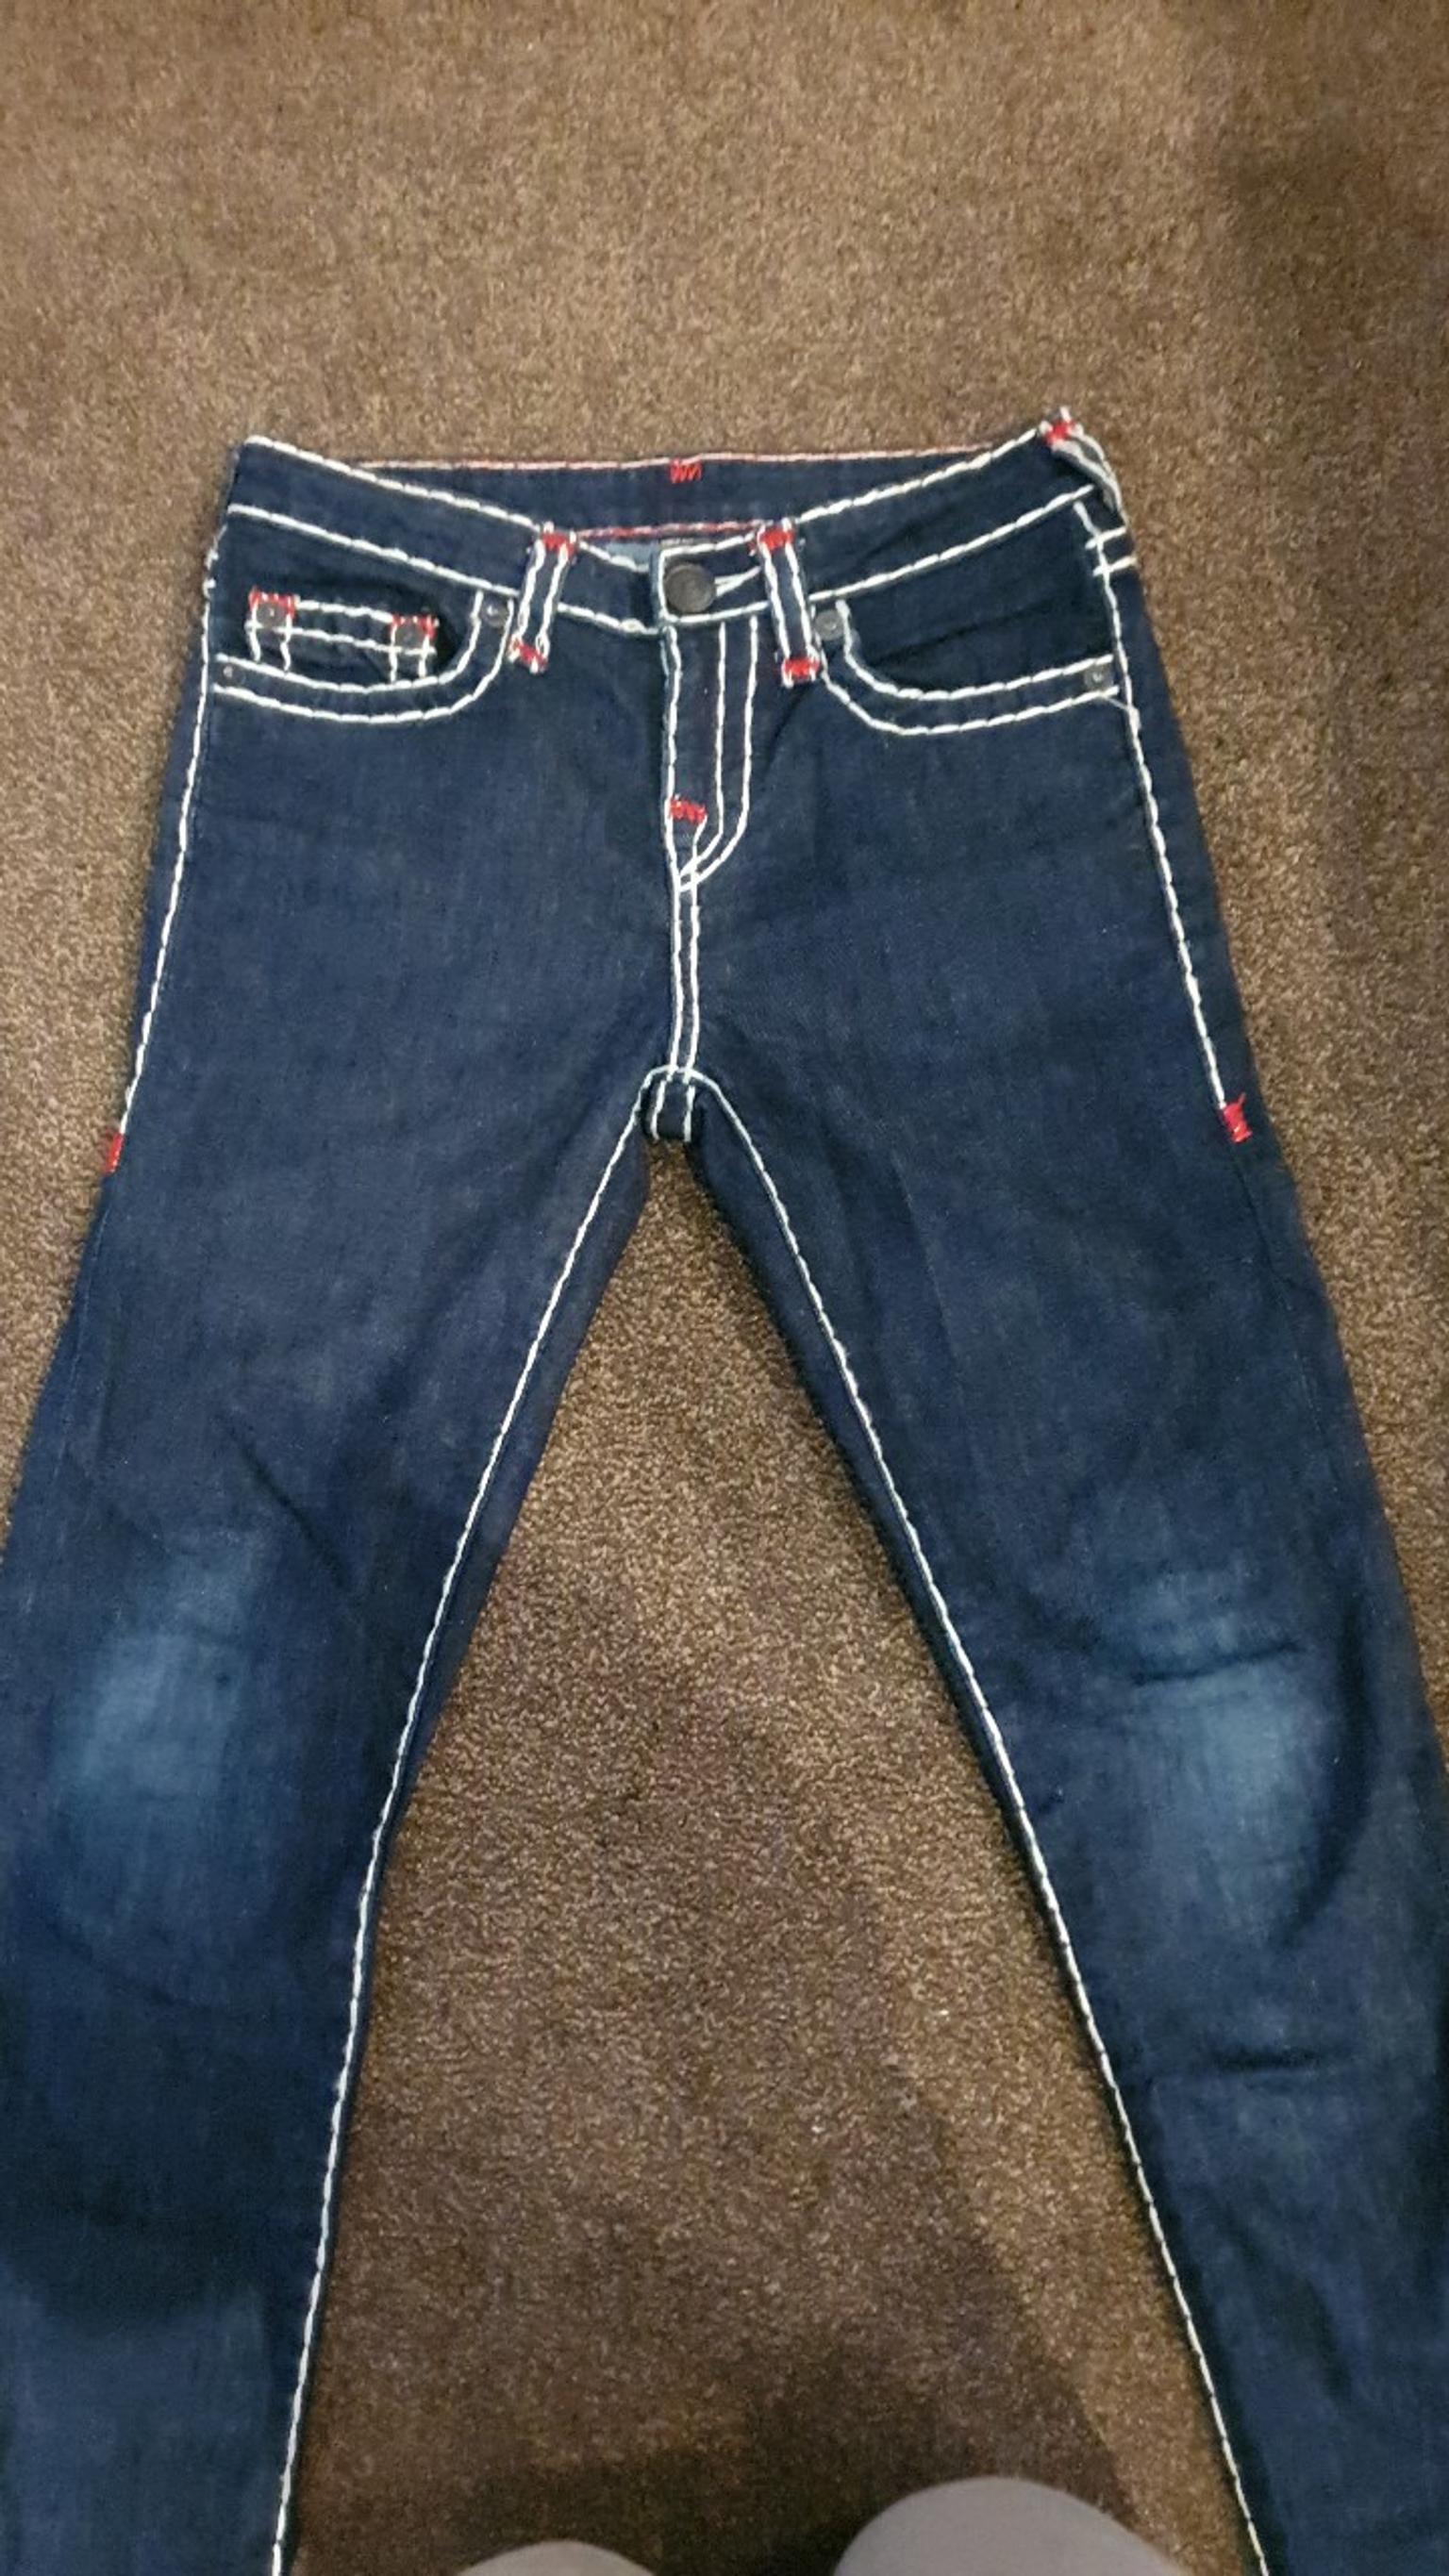 true religion jeans red and white stitching